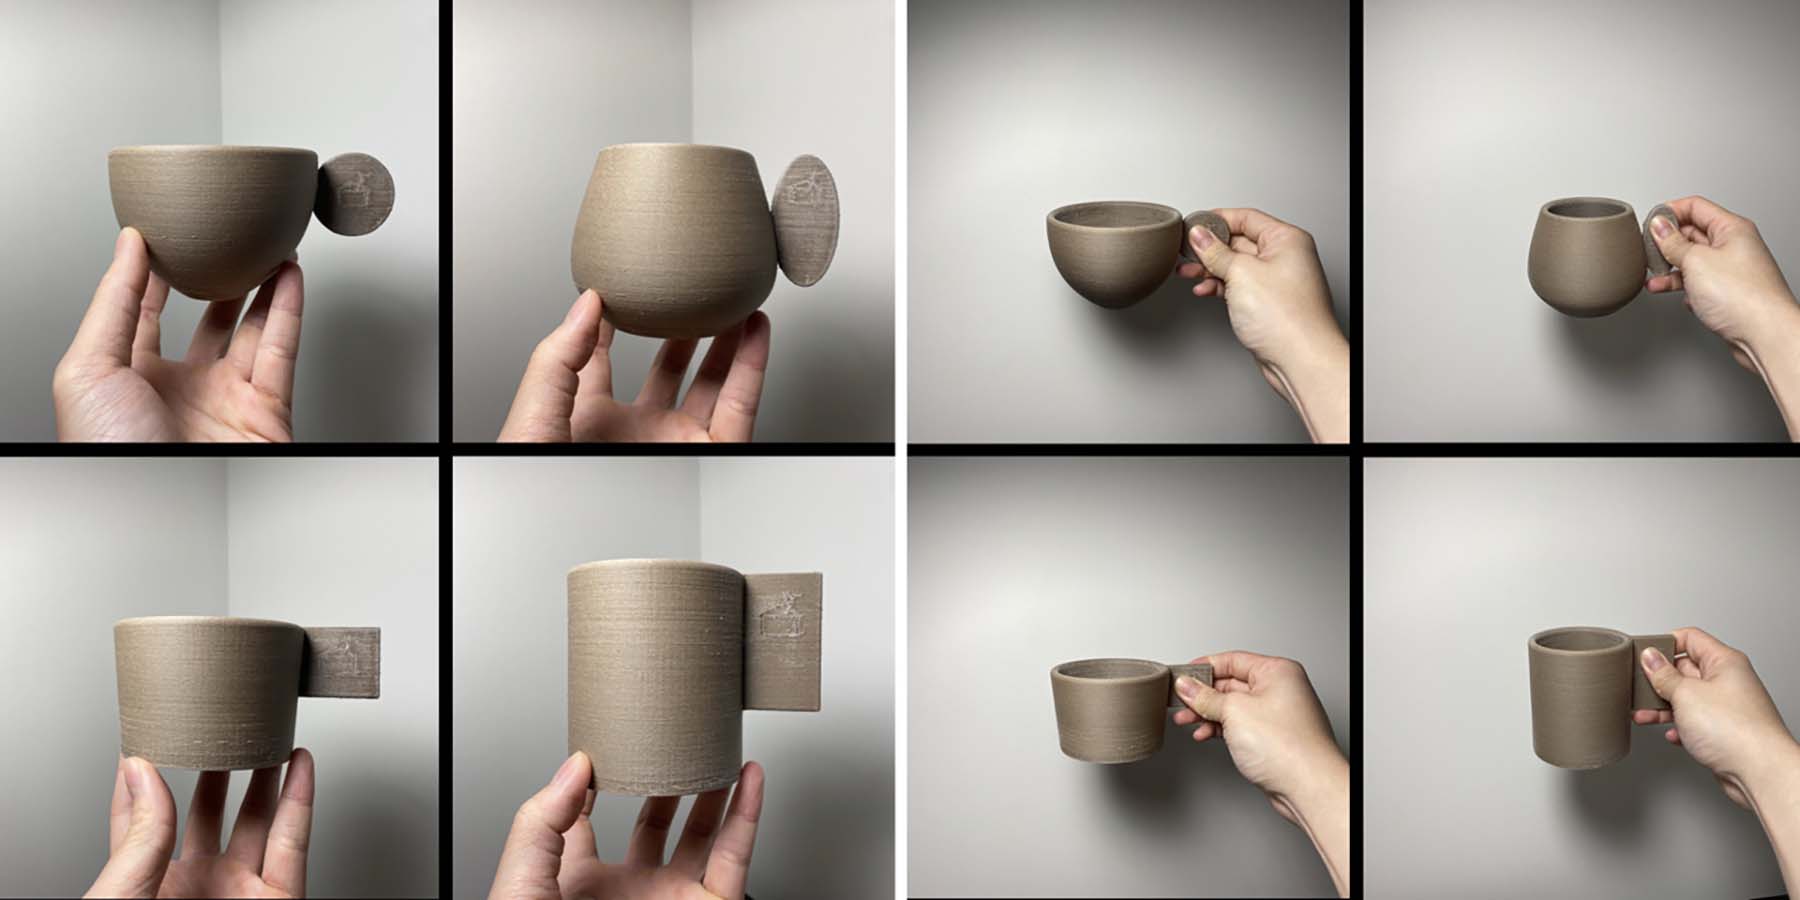 This is the images of individual cups in the series in multiple angles and holding position